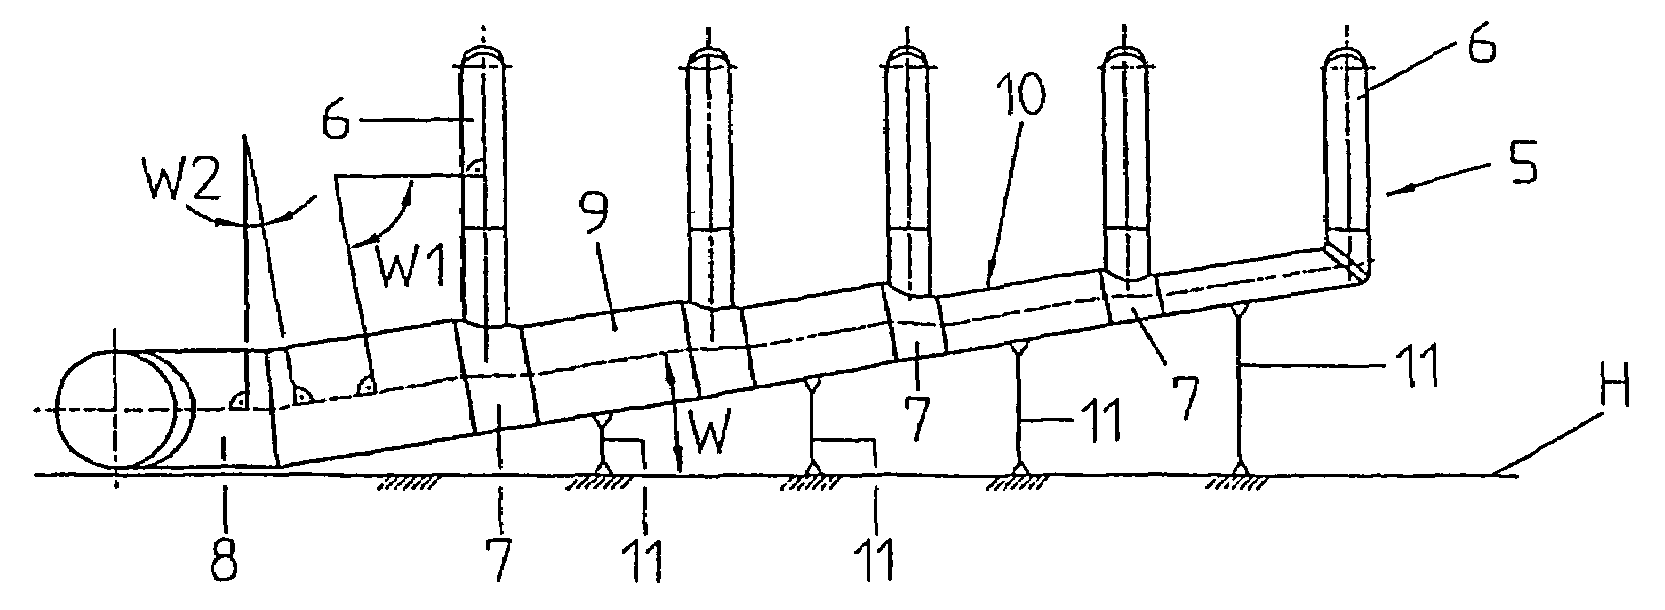 Exhaust-steam pipeline for a steam power plant